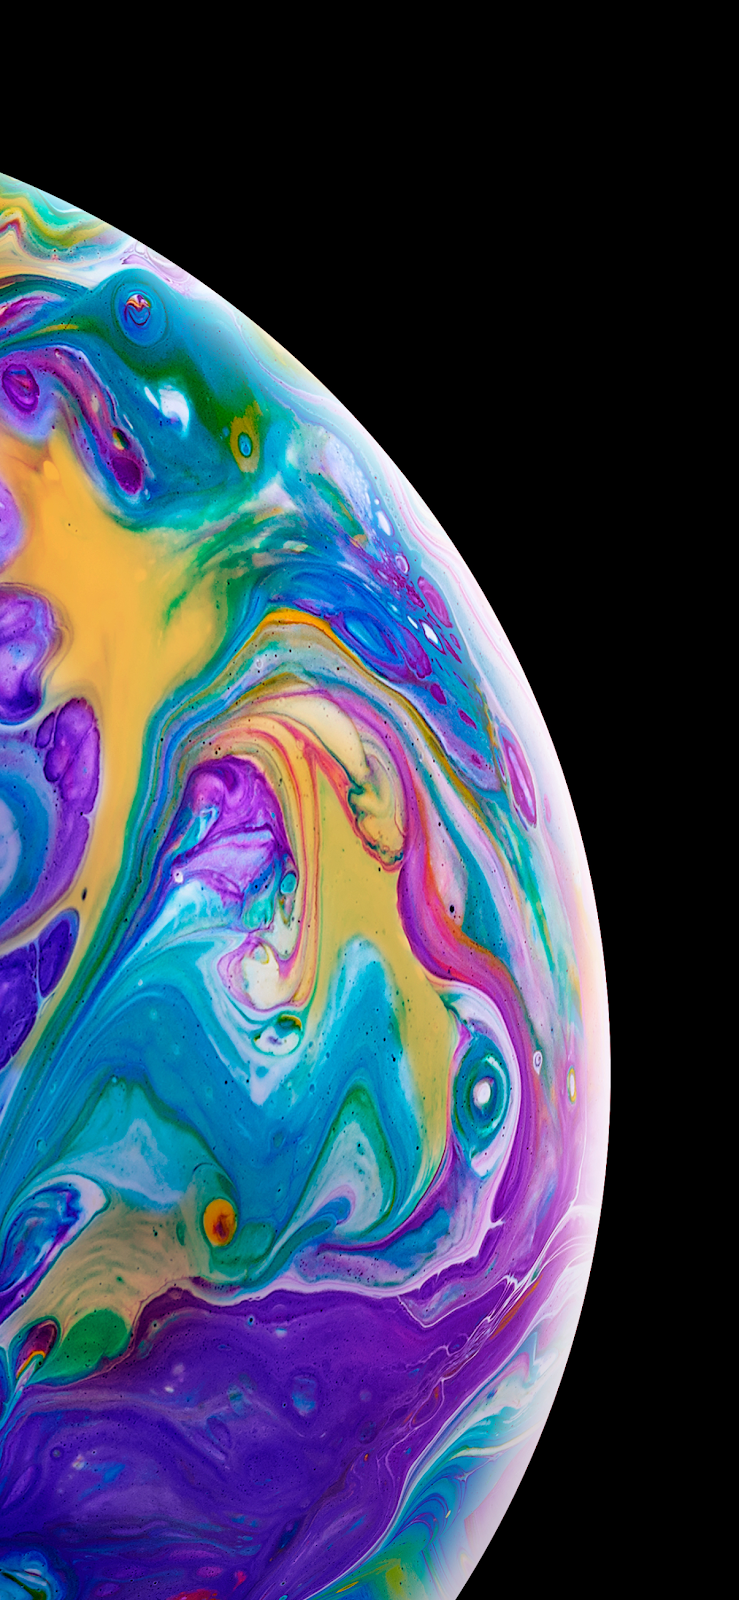 Another colorful bubble (iPhone X)